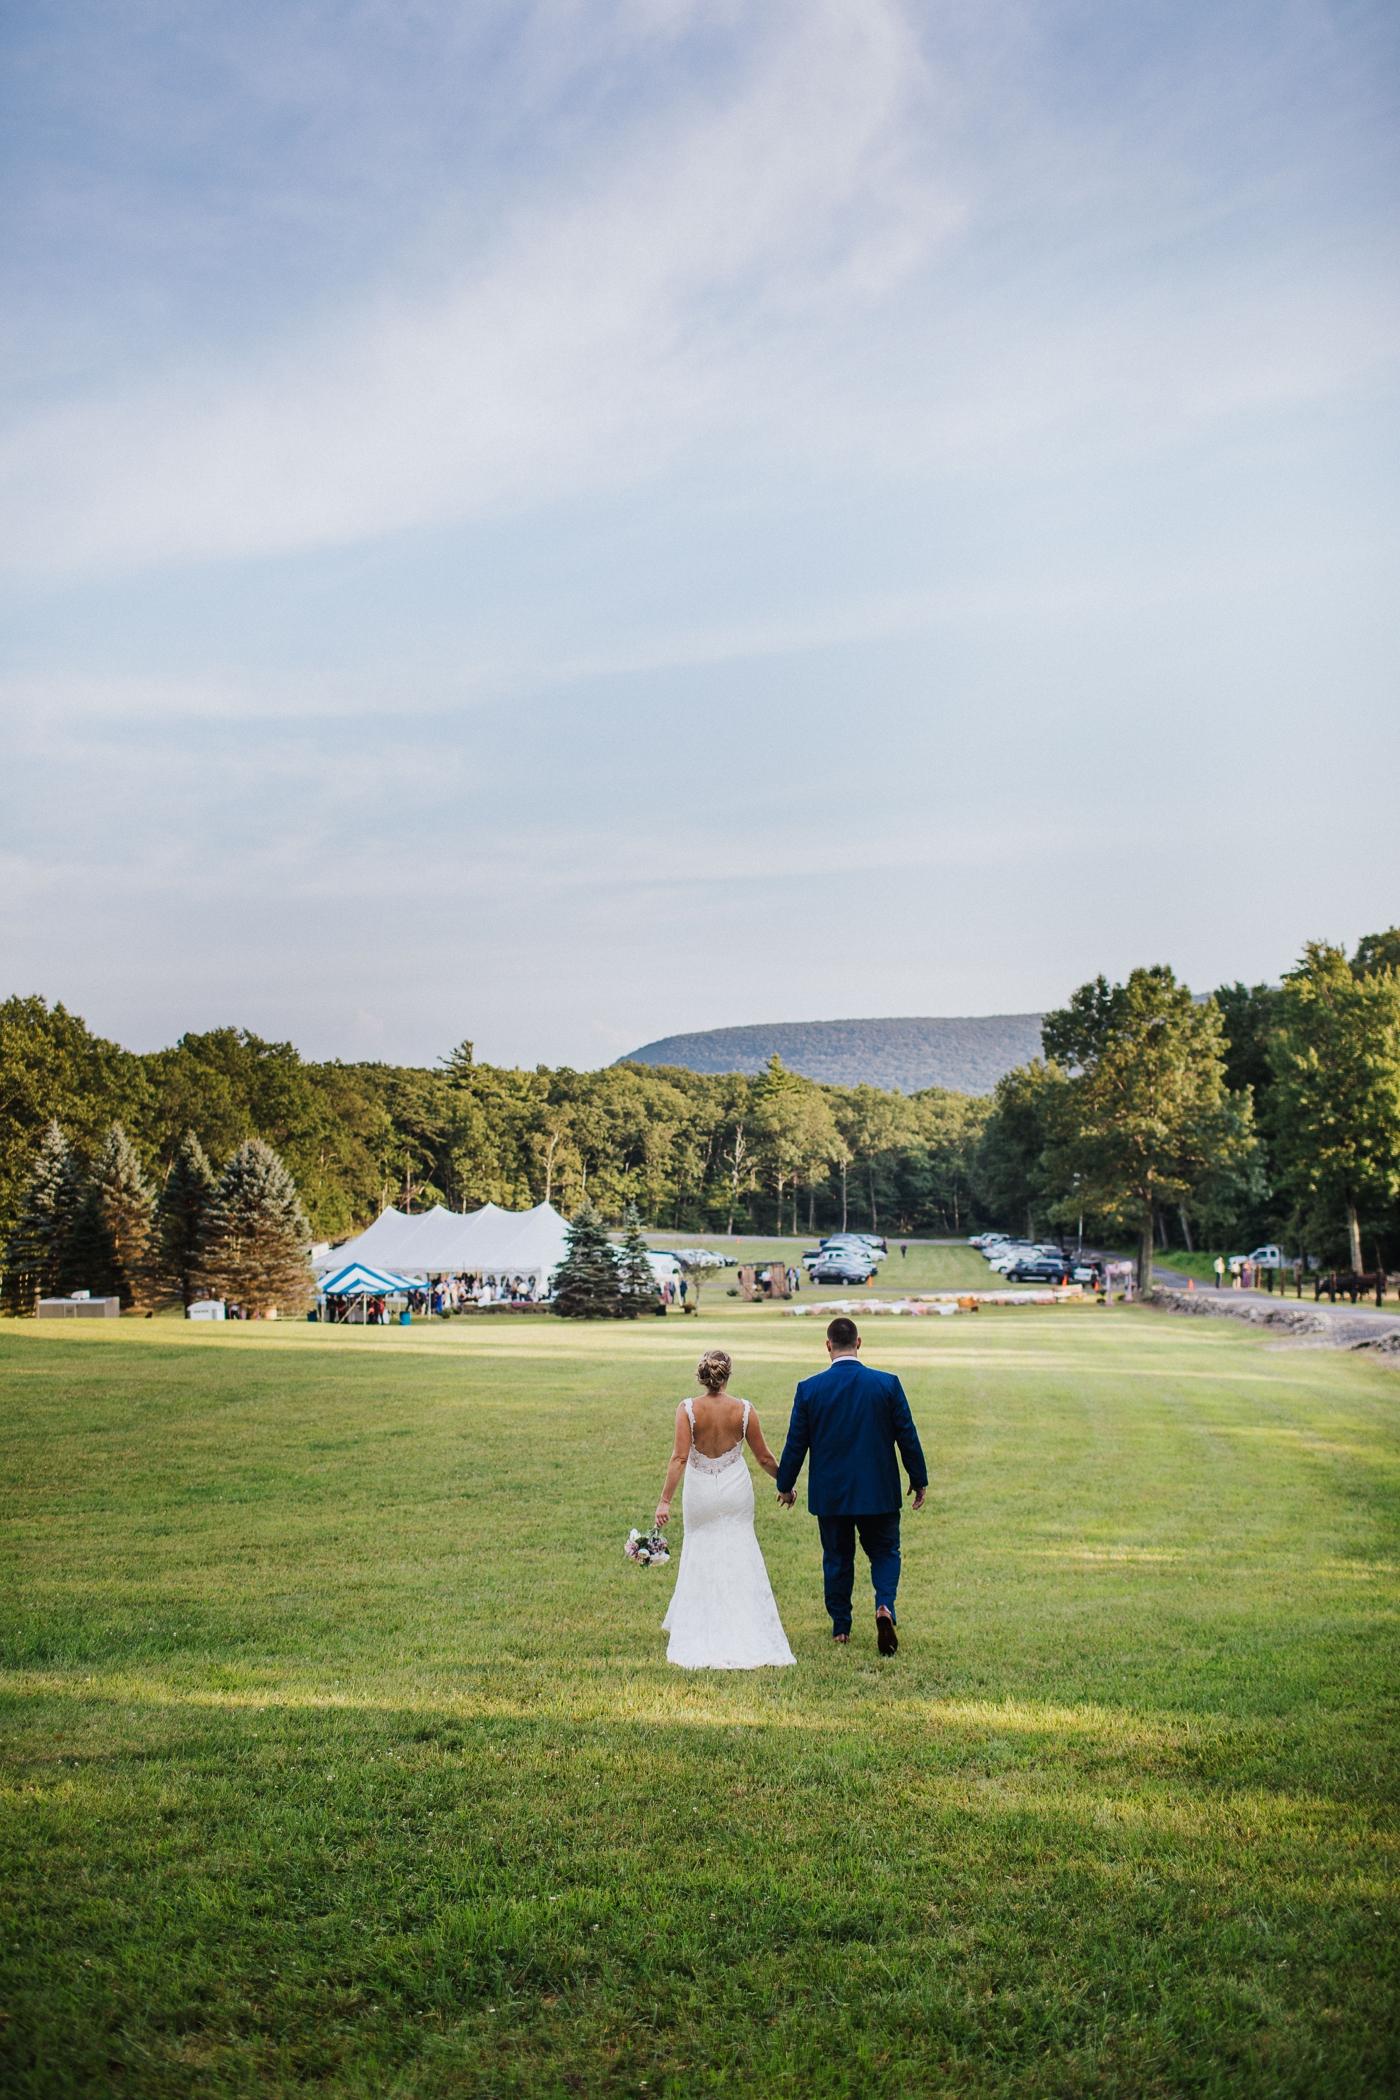 Tented wedding ceremony on a farm in The Pocono Mountains